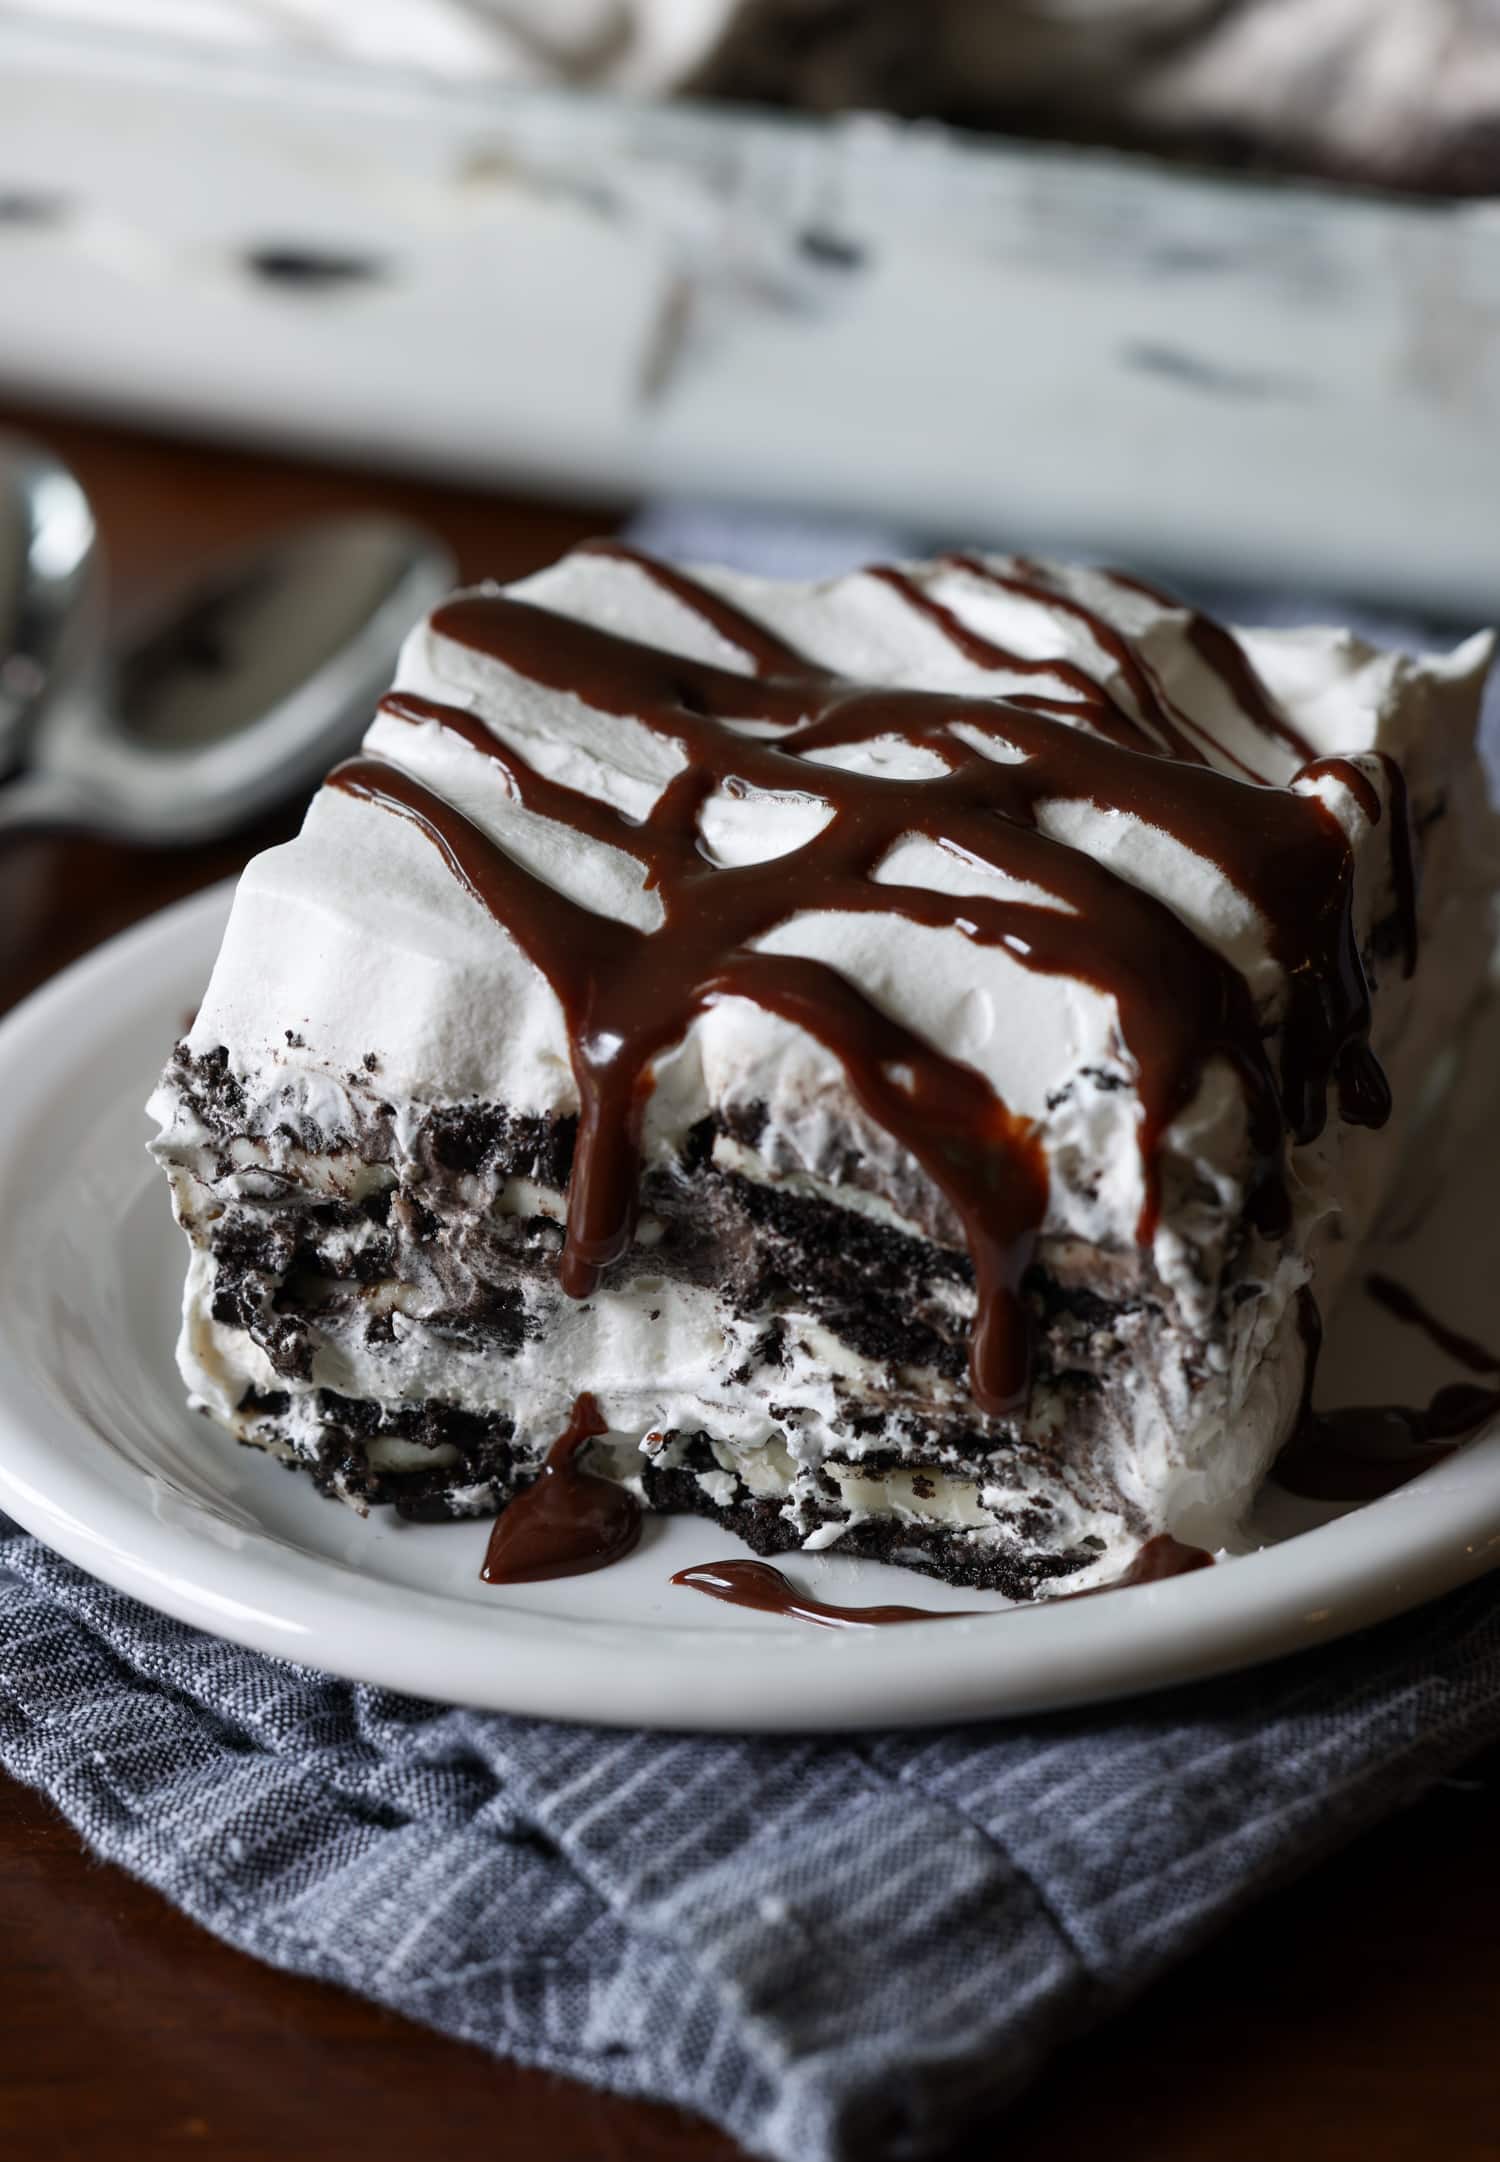 A layered whipped cream and Oreo icebox cake dessert slice on a plate topped with chocolate sauce